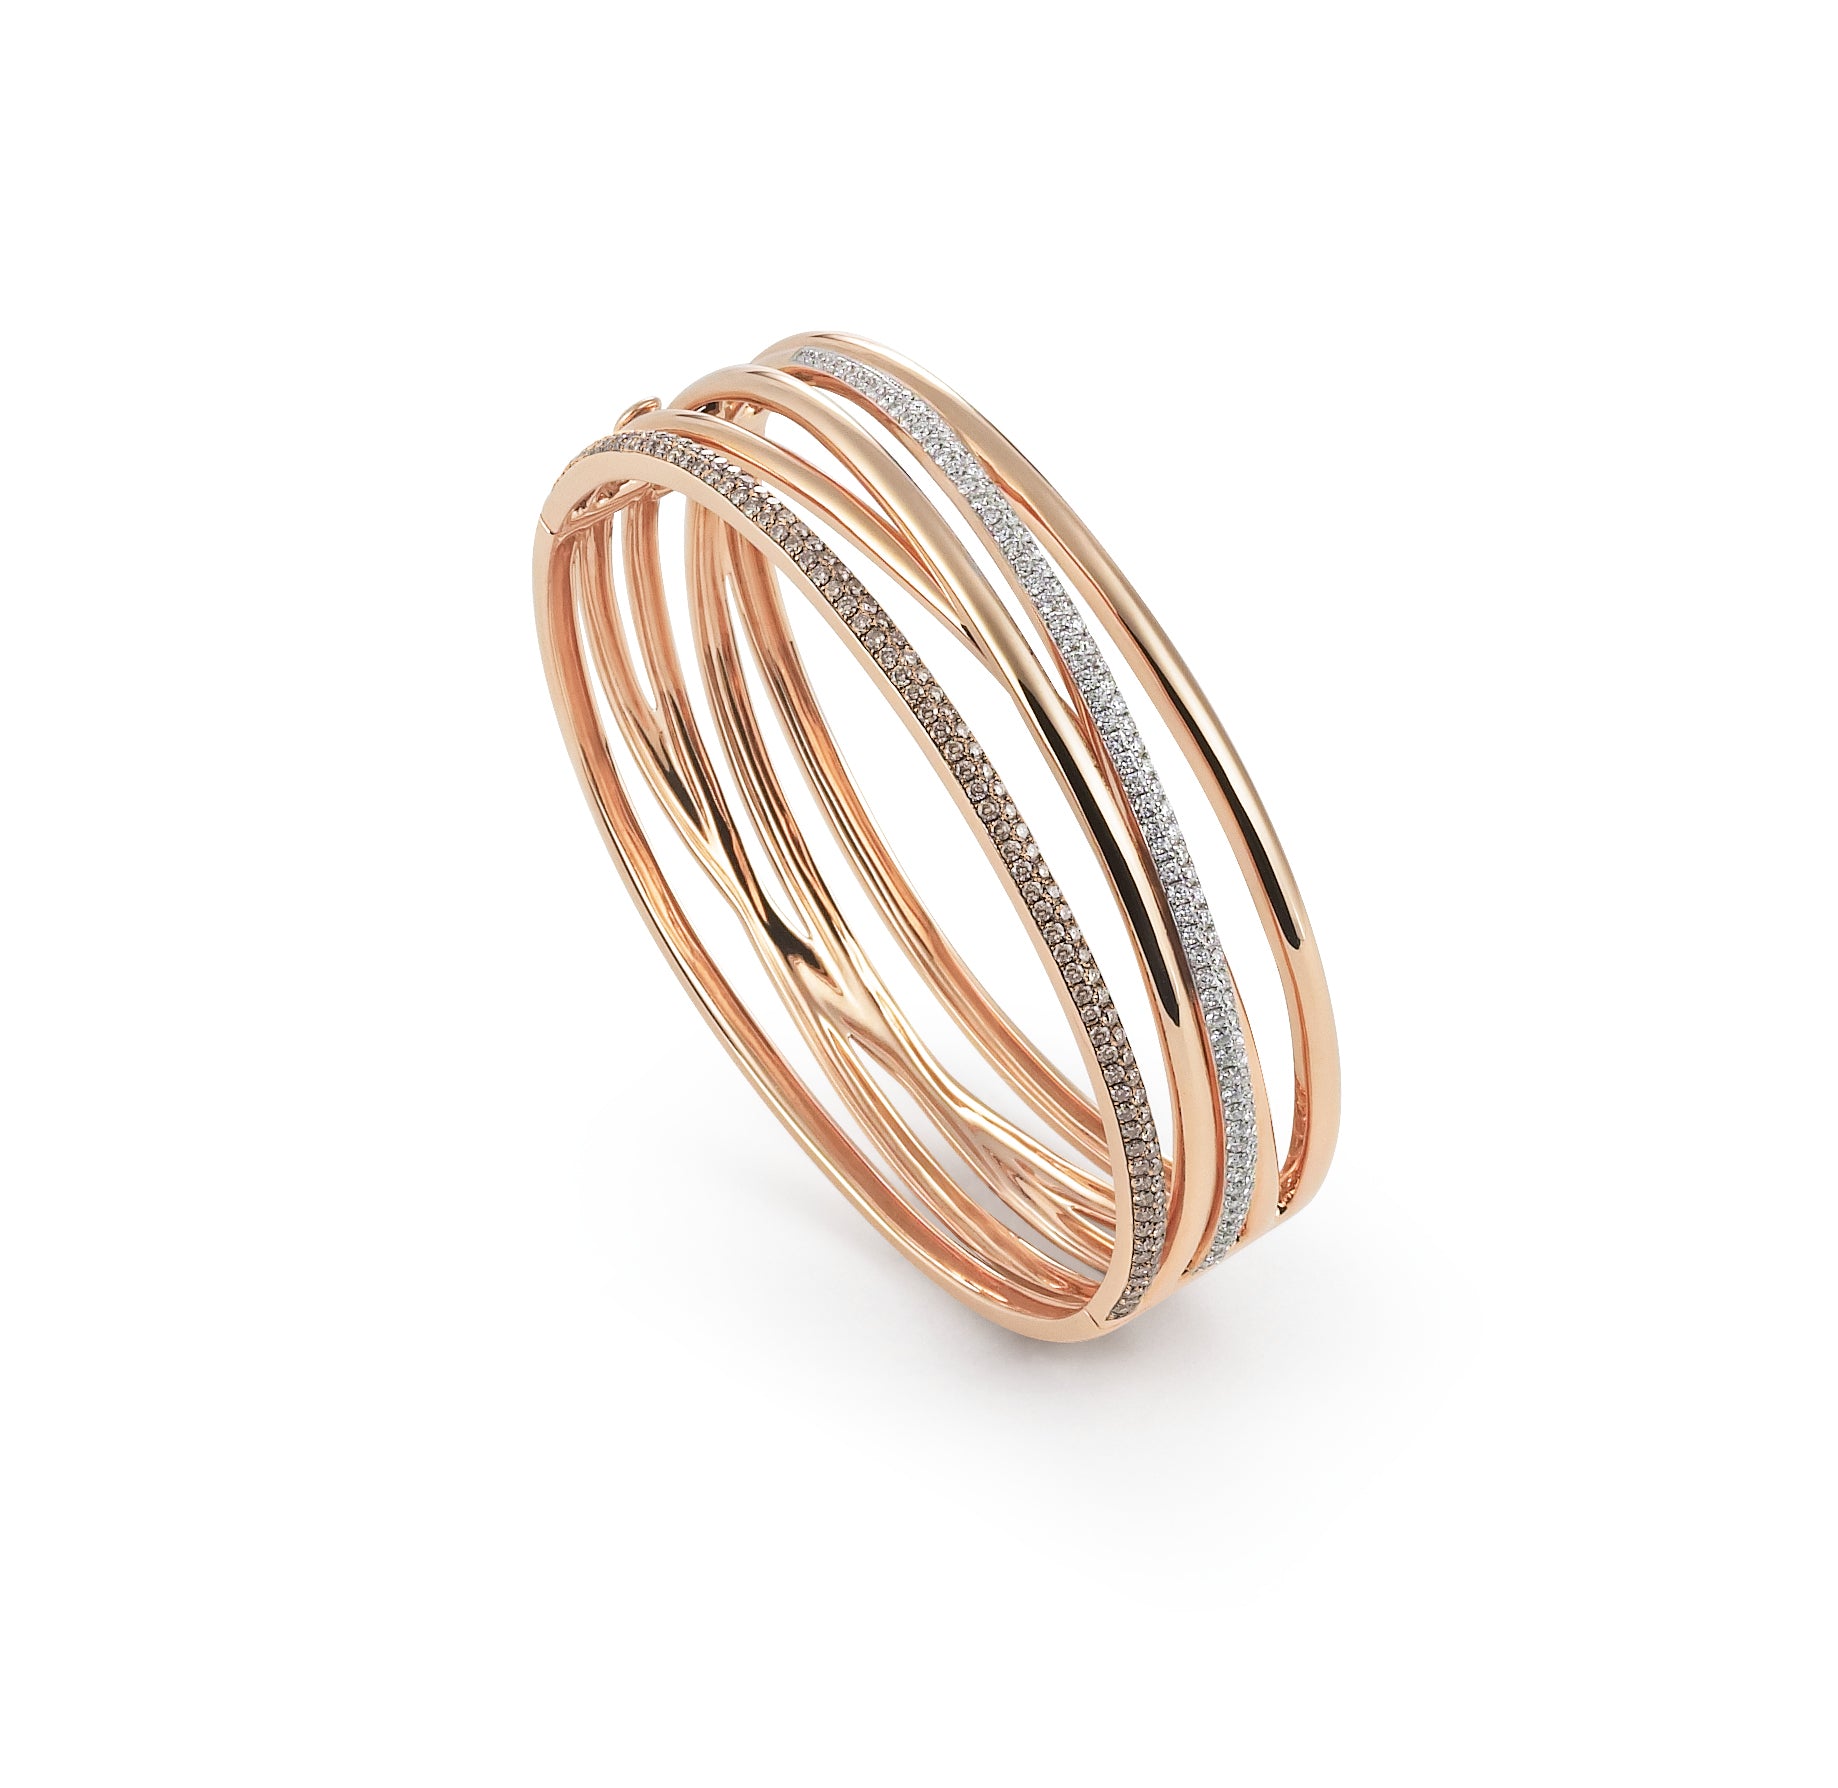 Serenata Bangle in 18k Rose Gold with Brown and White Diamonds - Orsini Jewellers NZ